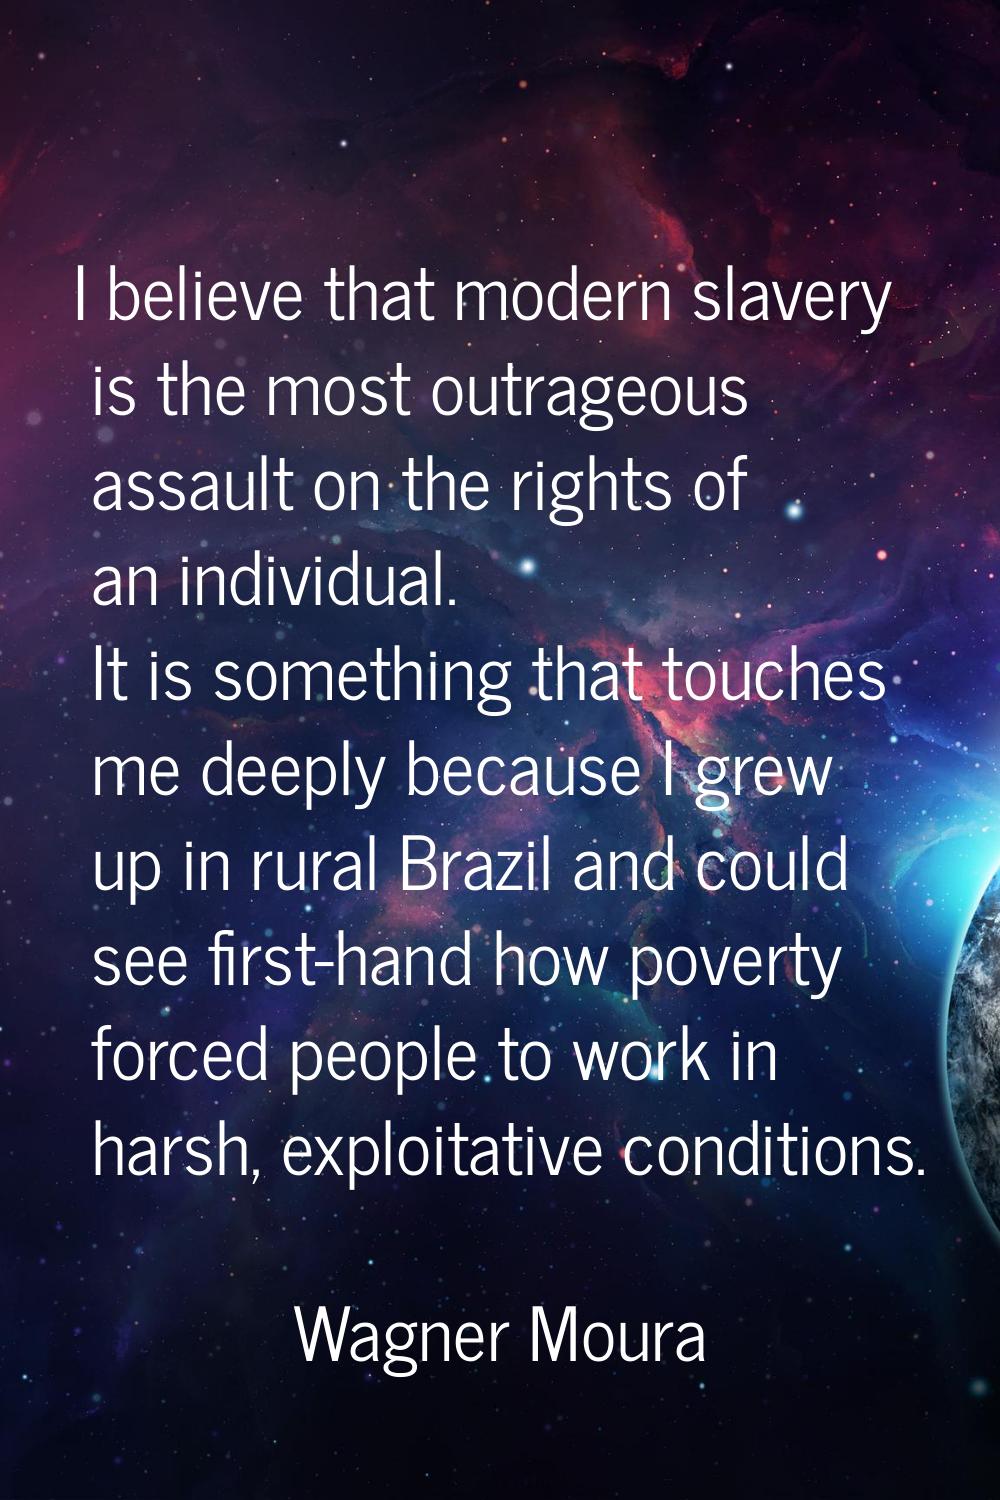 I believe that modern slavery is the most outrageous assault on the rights of an individual. It is 